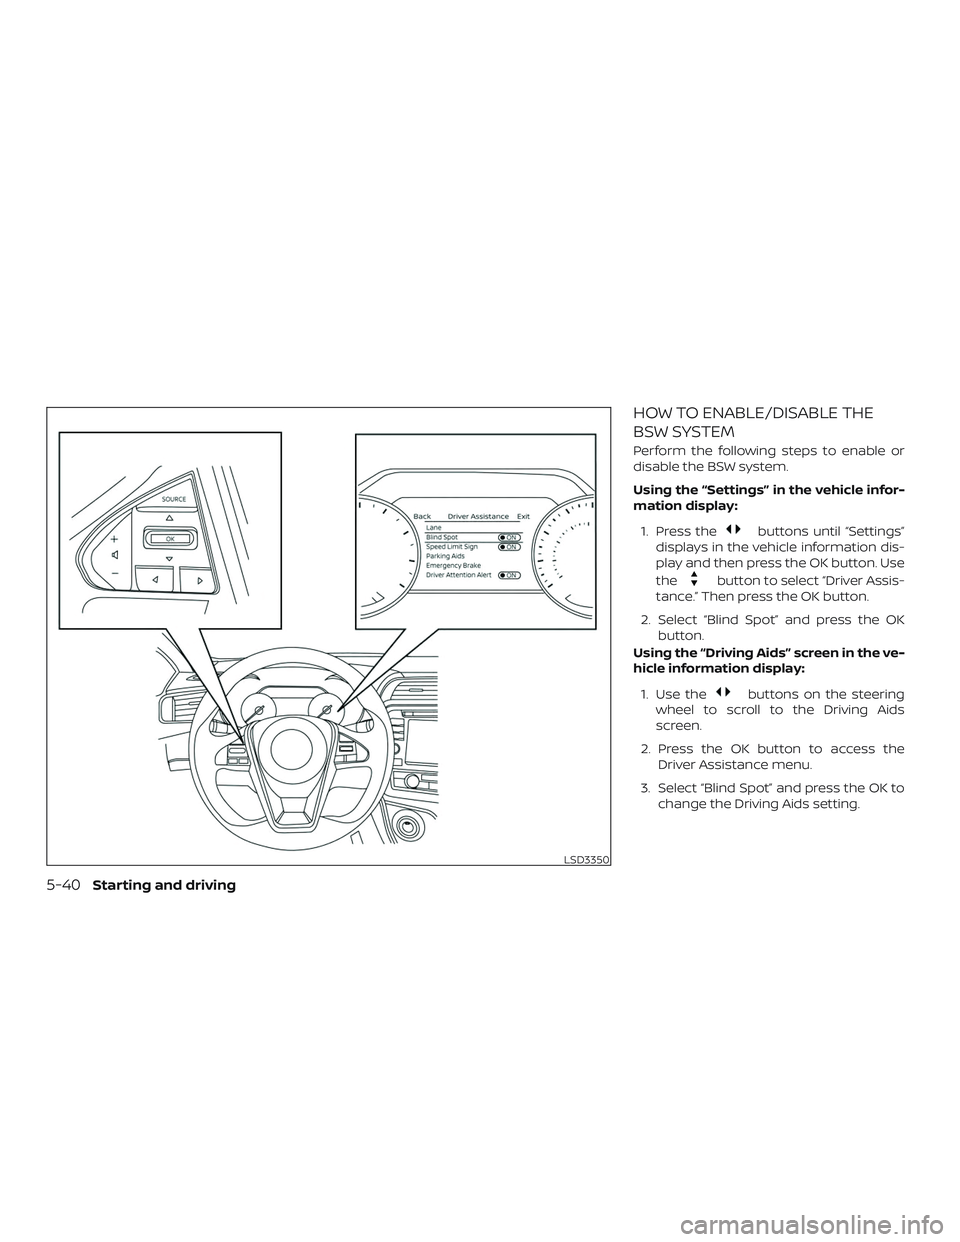 NISSAN MAXIMA 2020  Owner´s Manual HOW TO ENABLE/DISABLE THE
BSW SYSTEM
Perform the following steps to enable or
disable the BSW system.
Using the “Settings” in the vehicle infor-
mation display:1. Press the
buttons until “Settin